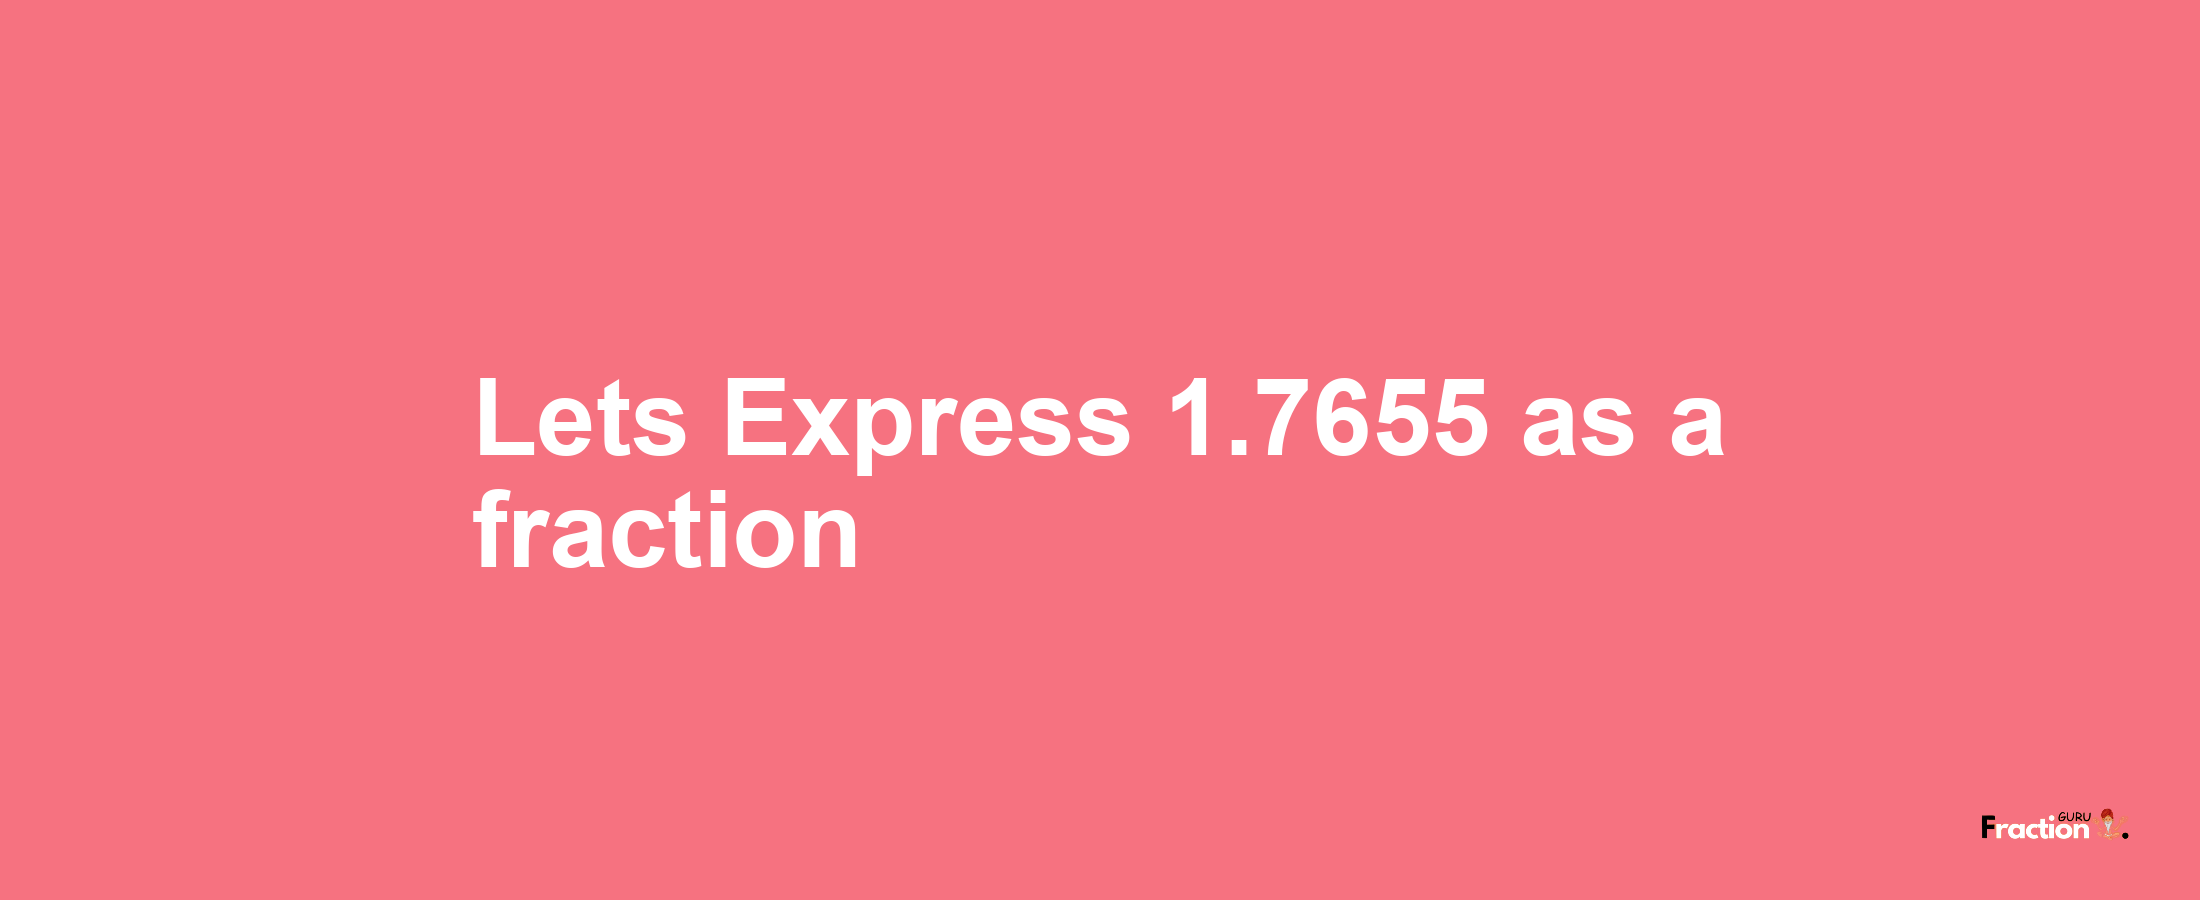 Lets Express 1.7655 as afraction